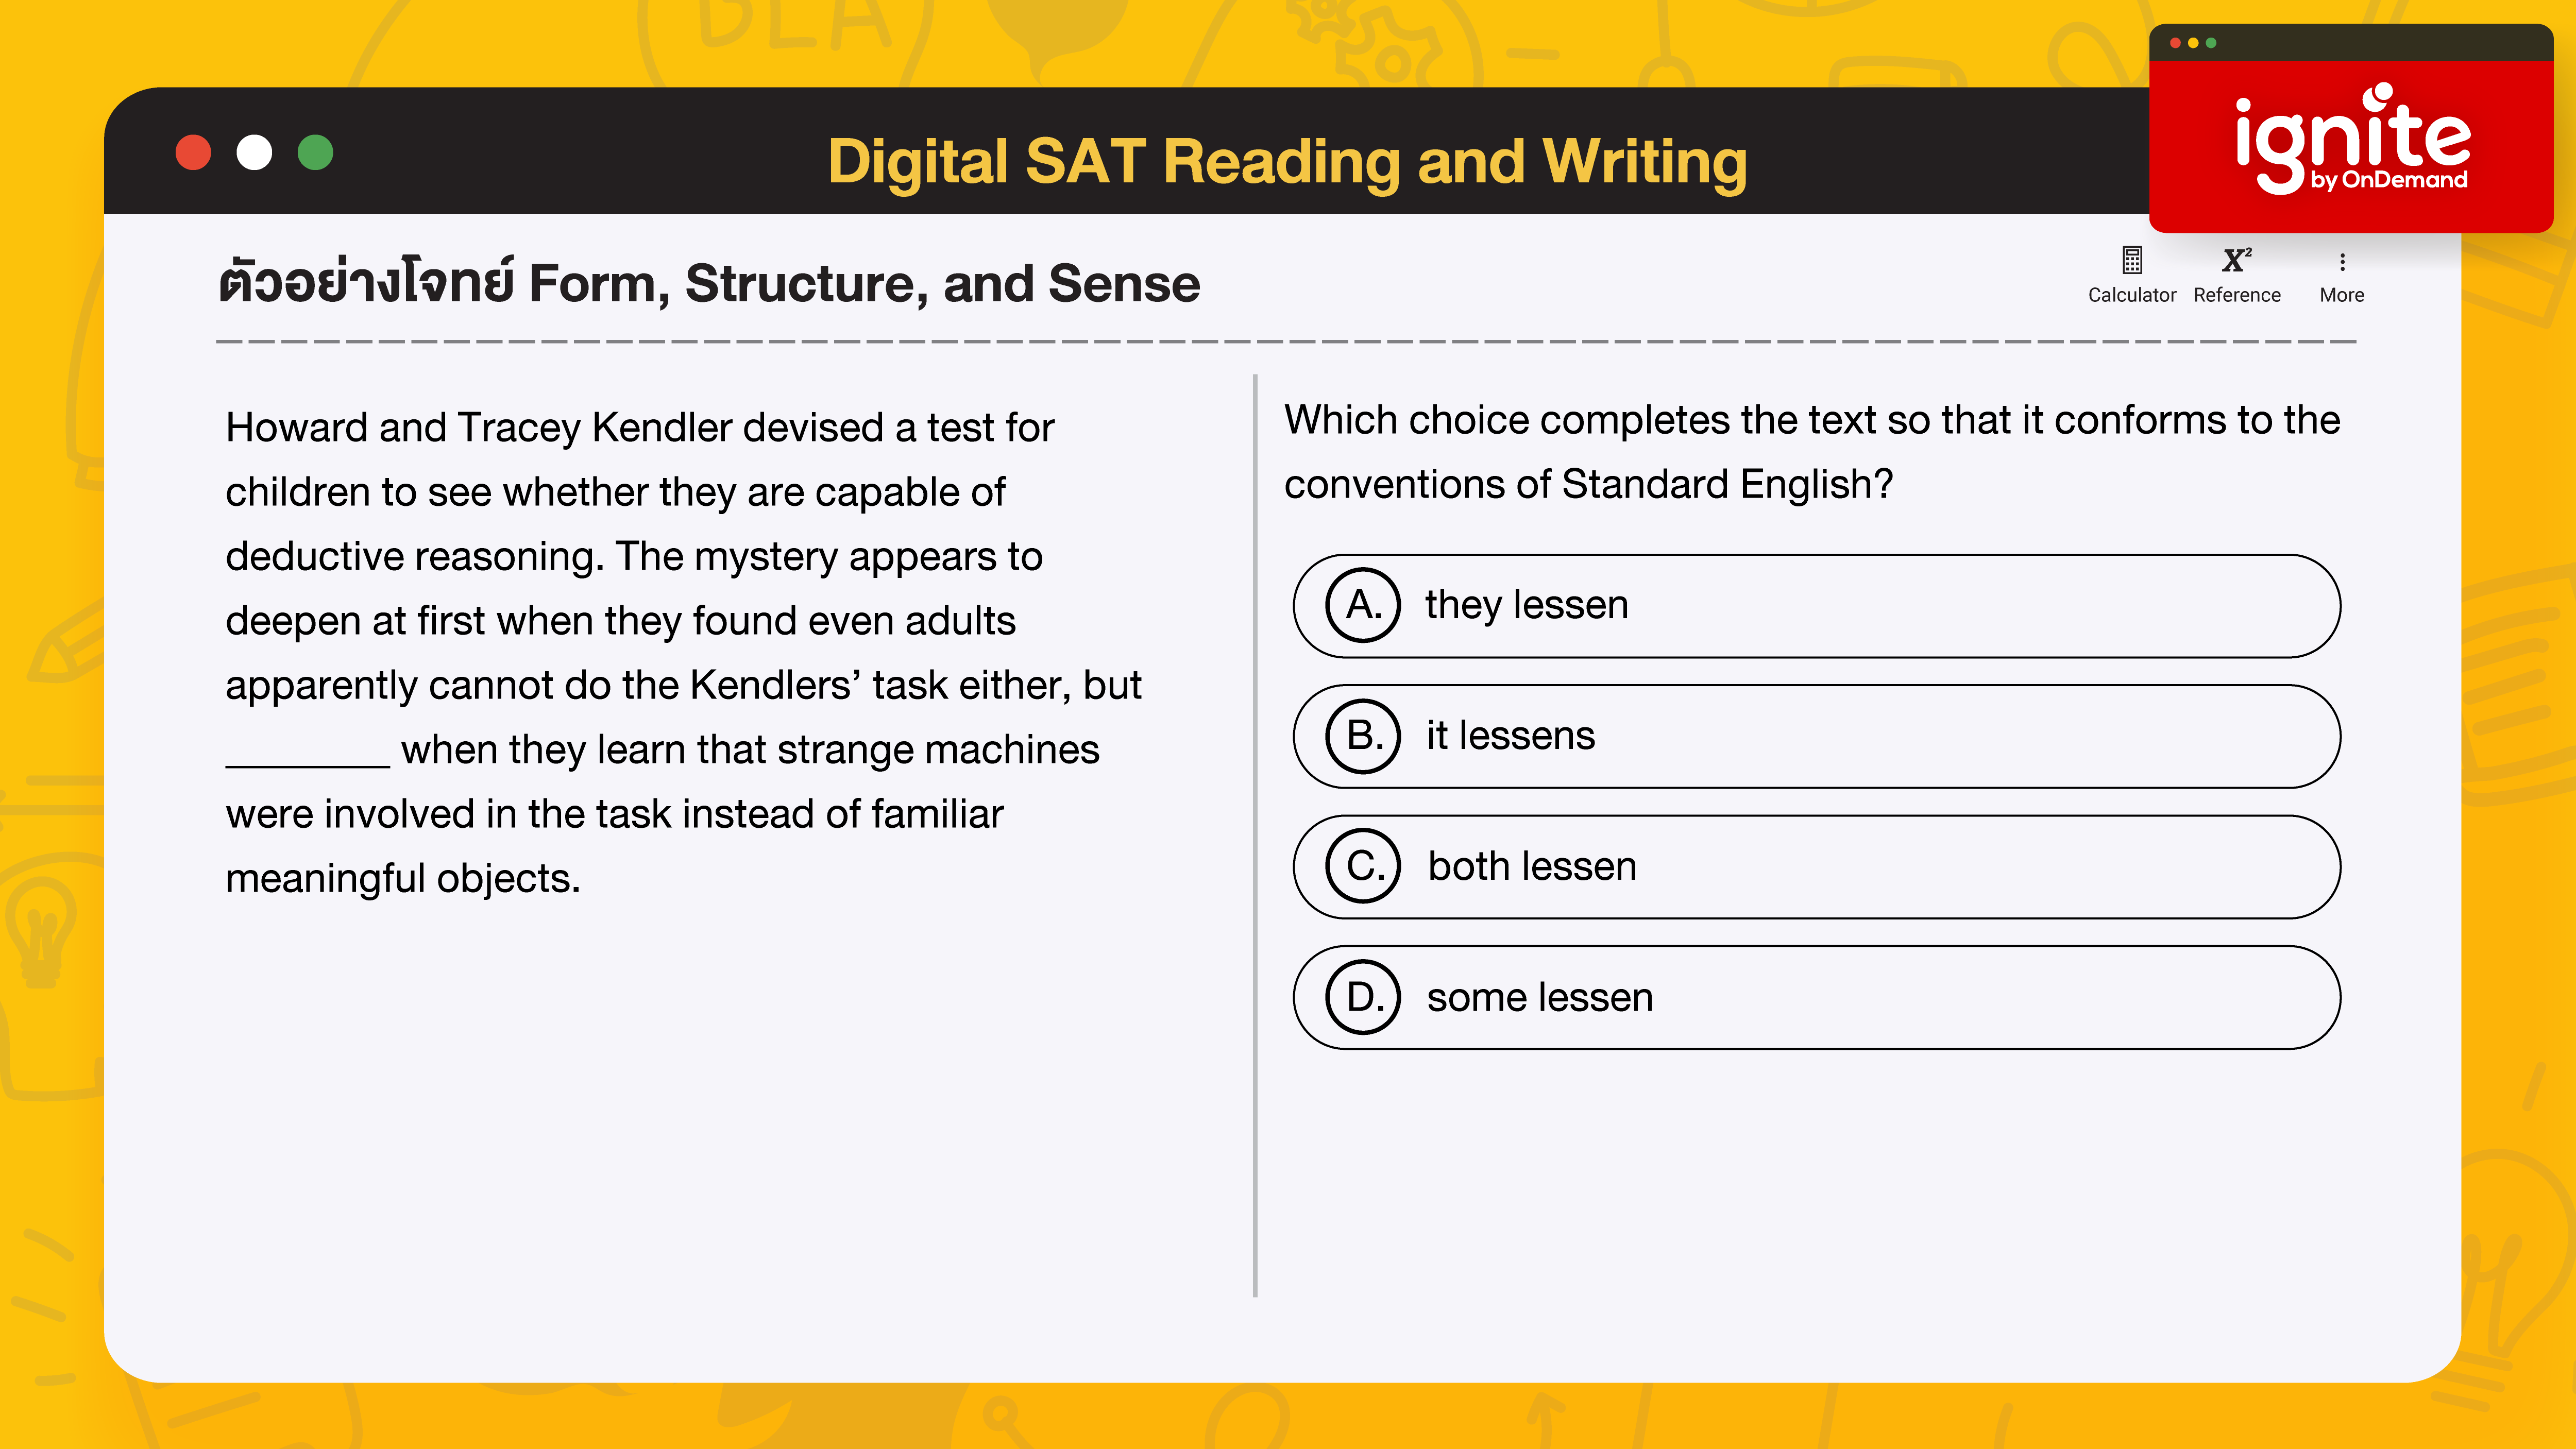 form structure and sense - Digital SAT Reading and Wrting 2023 - ignite by OnDemand (2)